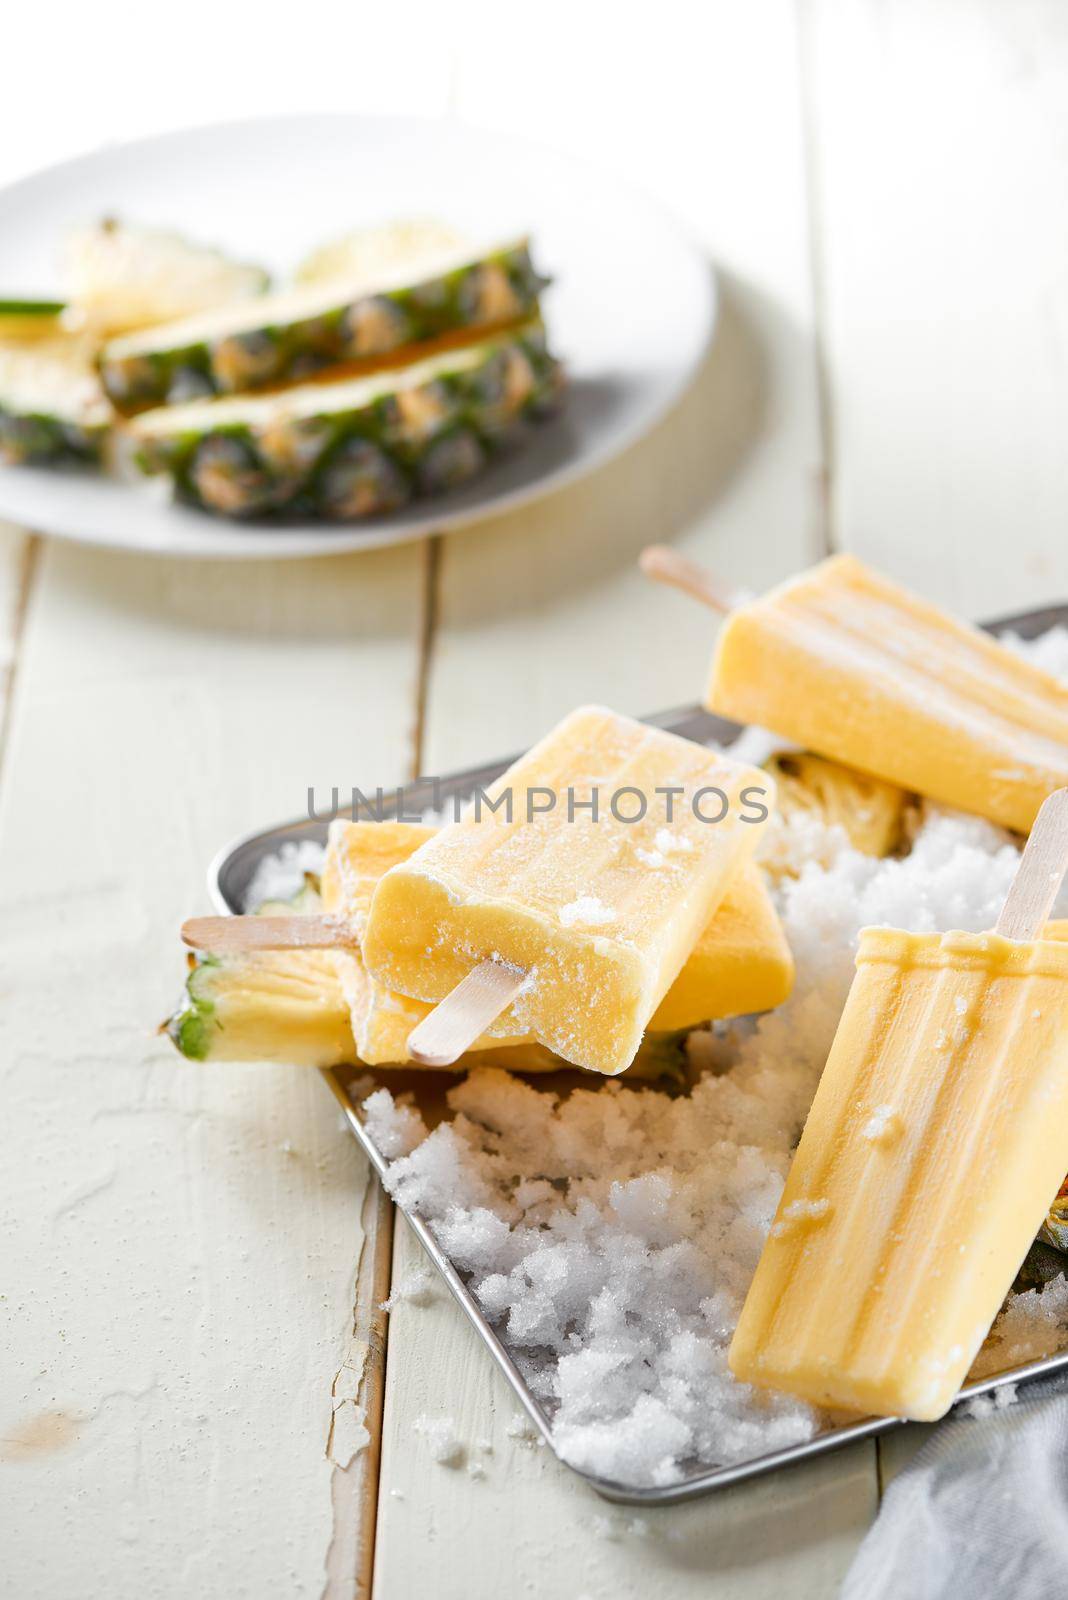 Homemade popsicles with lemon and mint on a wooden table by makidotvn